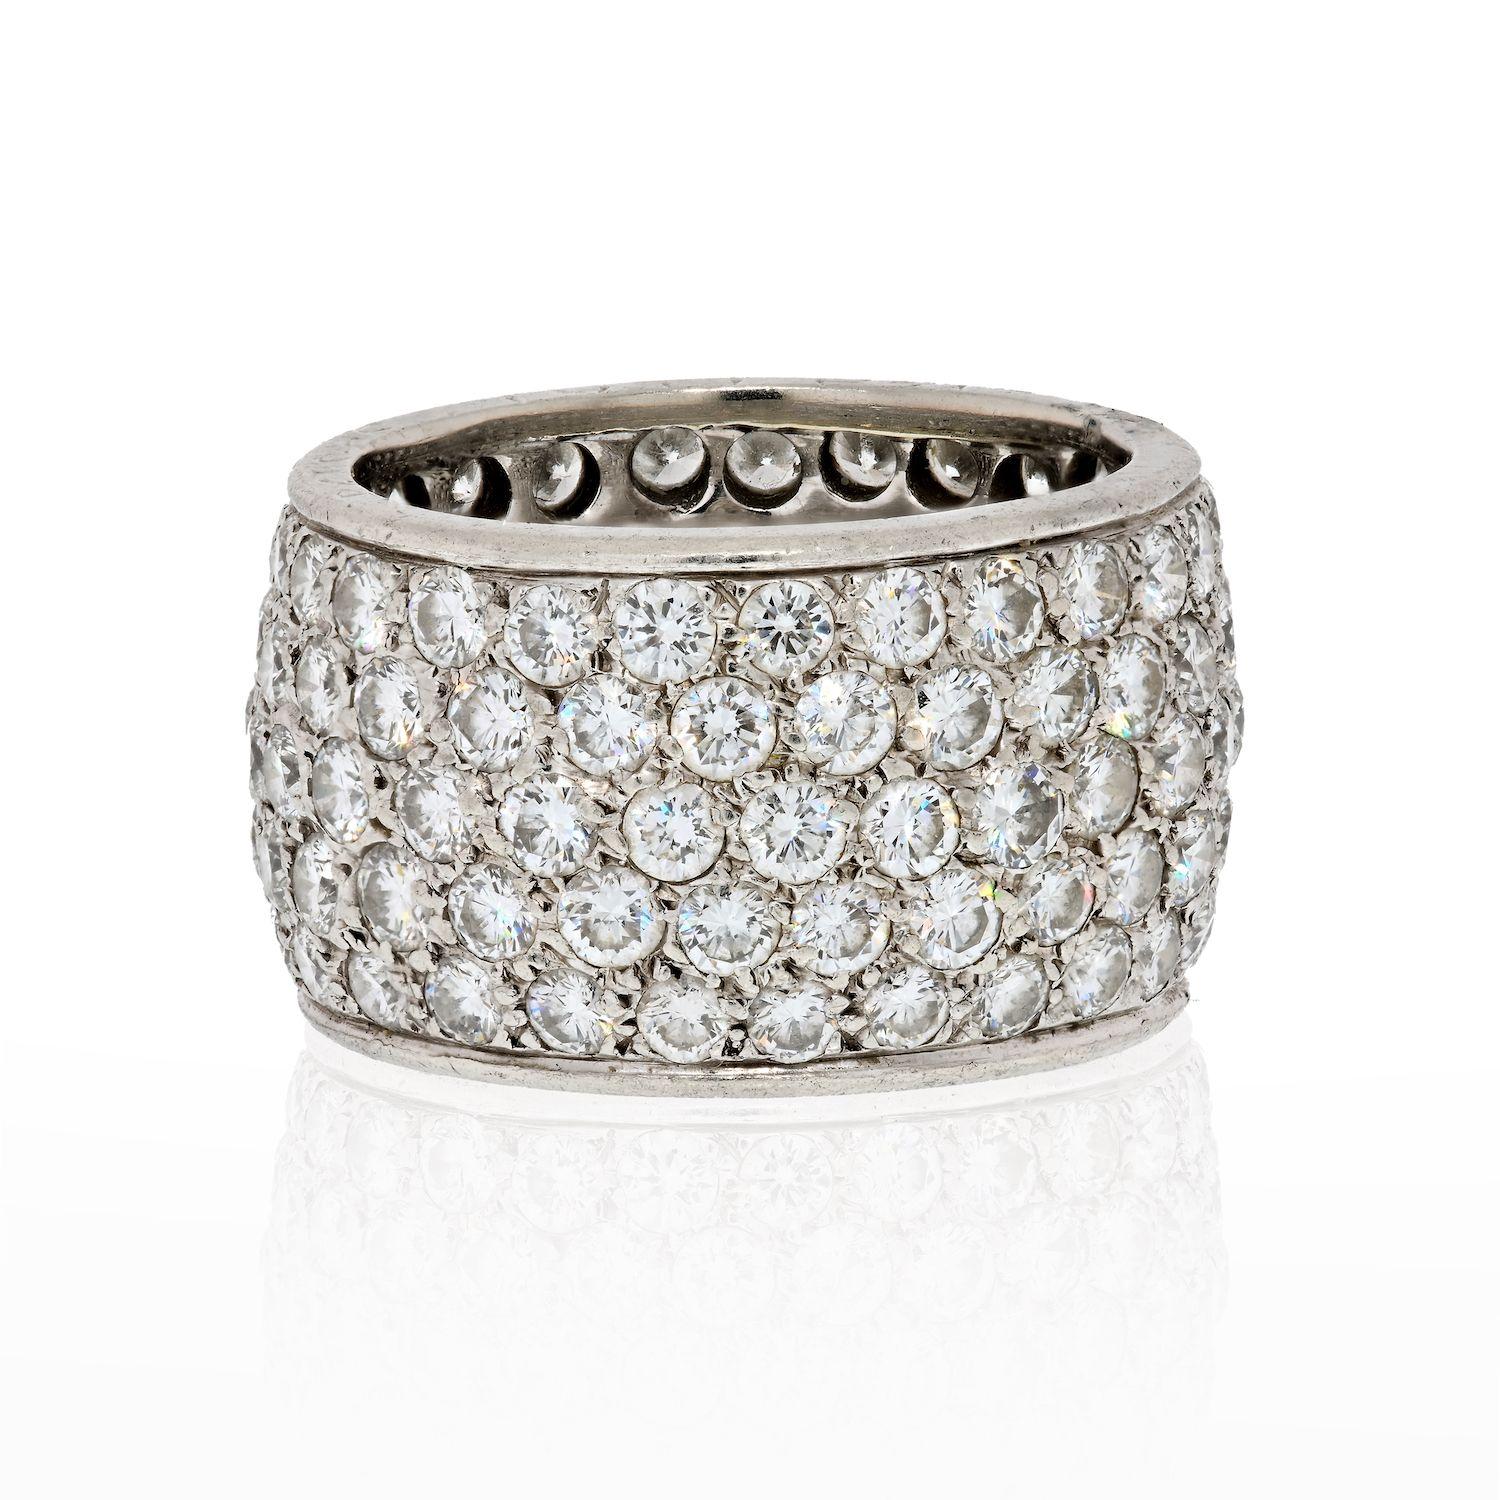 This classic Van Cleef & Arpels eternity band is made in platinum and pave-set with 5 rows of sparkling brilliant-cut round diamonds of an estimated 6 carats. Elegant and timeless. 
The ring is 12mm wide.
Comes with the VCA box. 